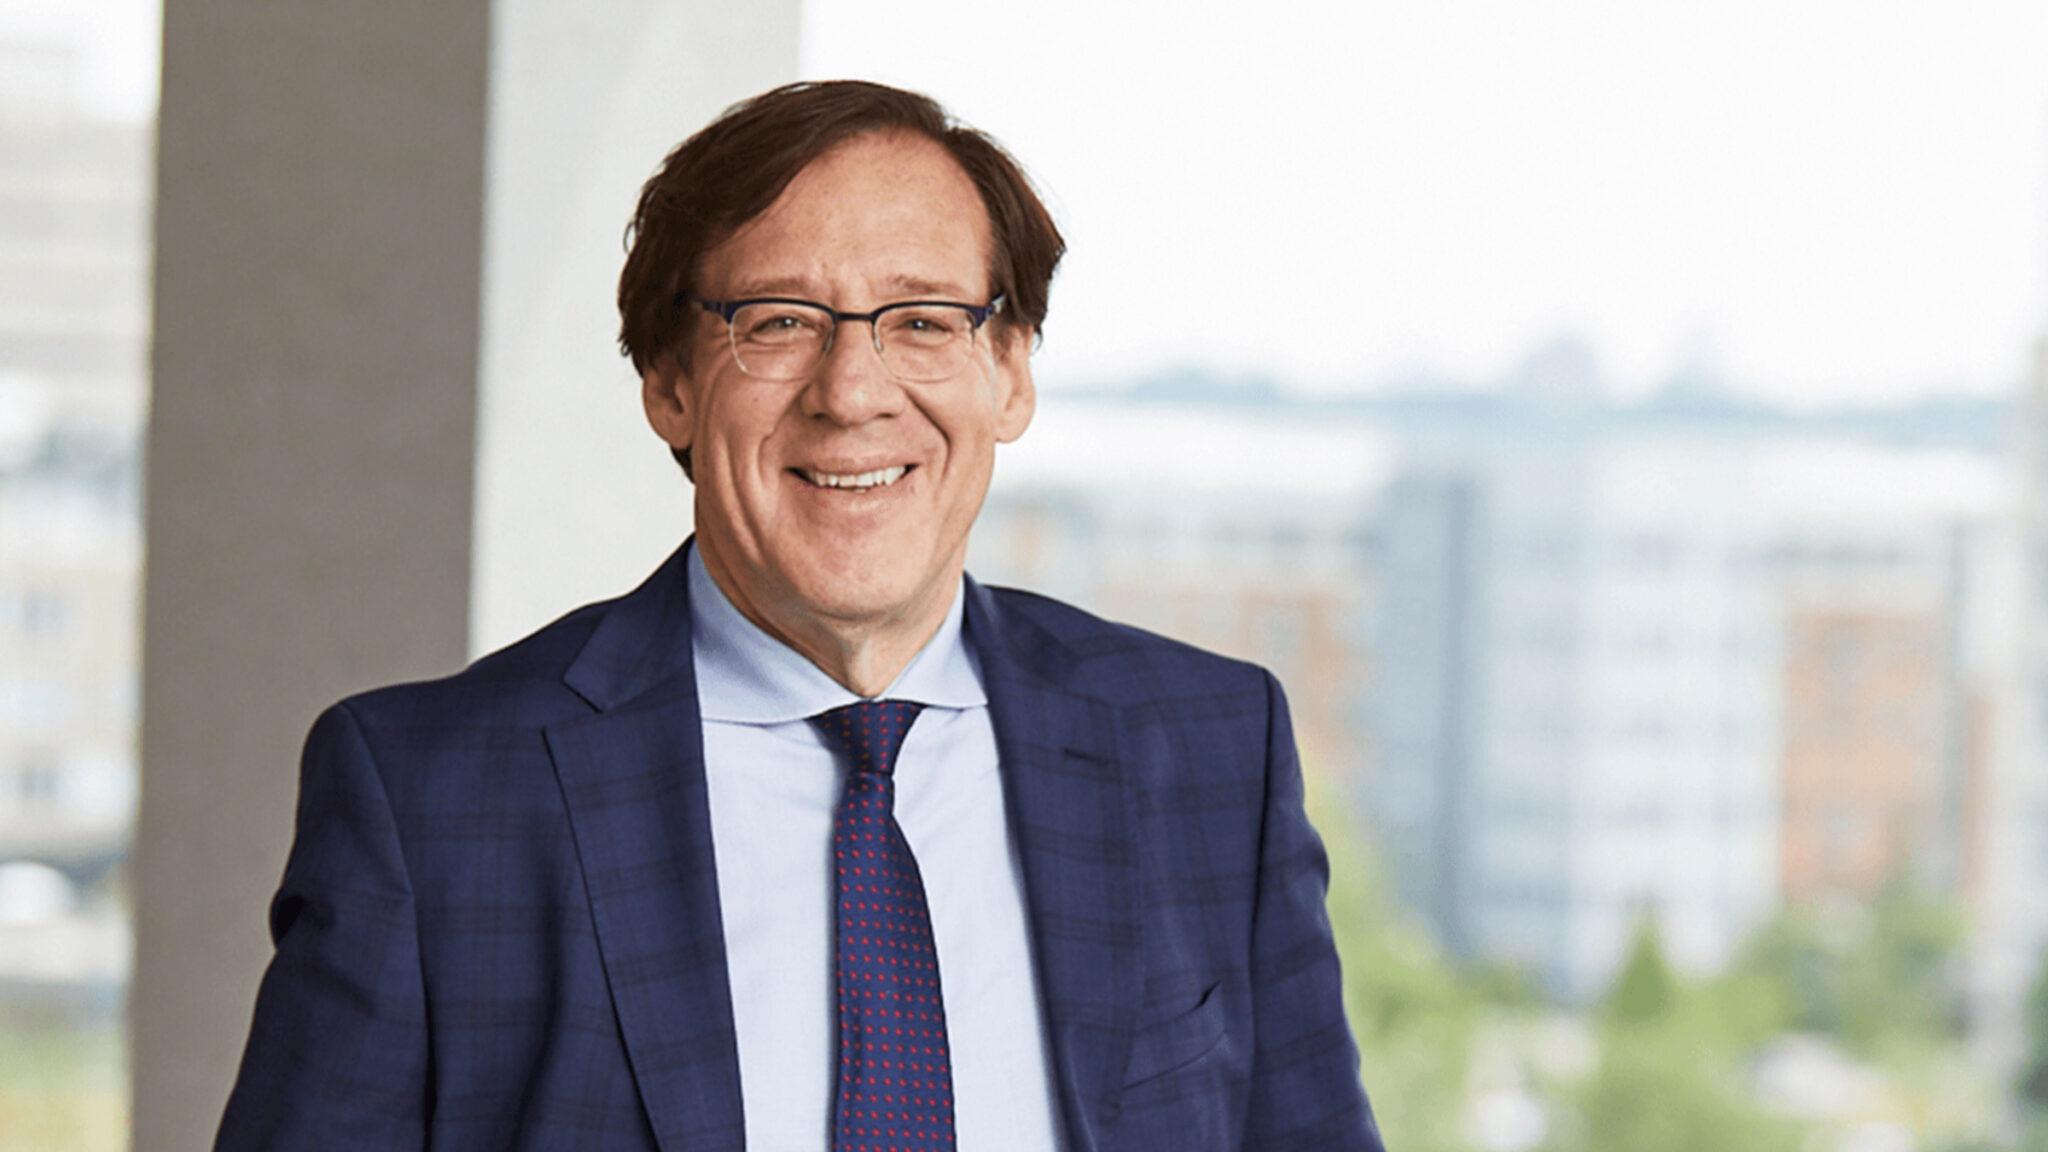 Greg Verdine will have many new C-suite friends at fungus biotech LifeMine after GSK-fueled $175M round